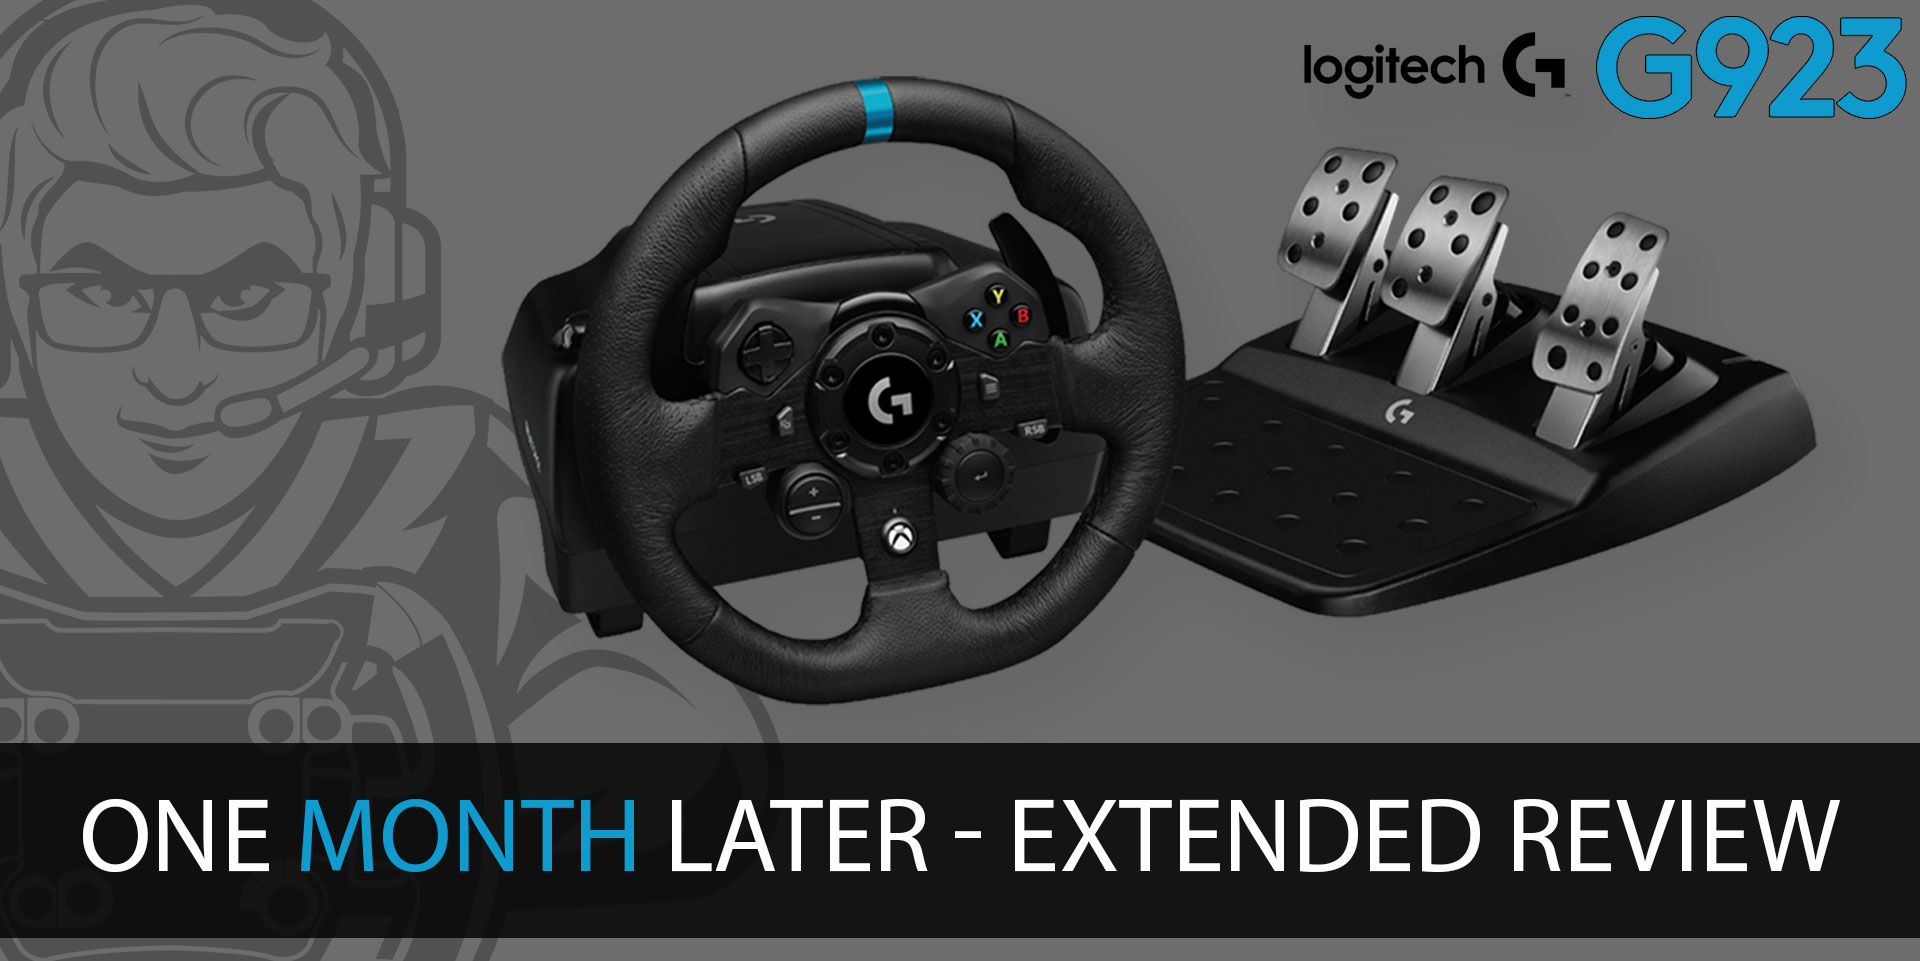 Get ready to feel the future of racing with the Logitech G923